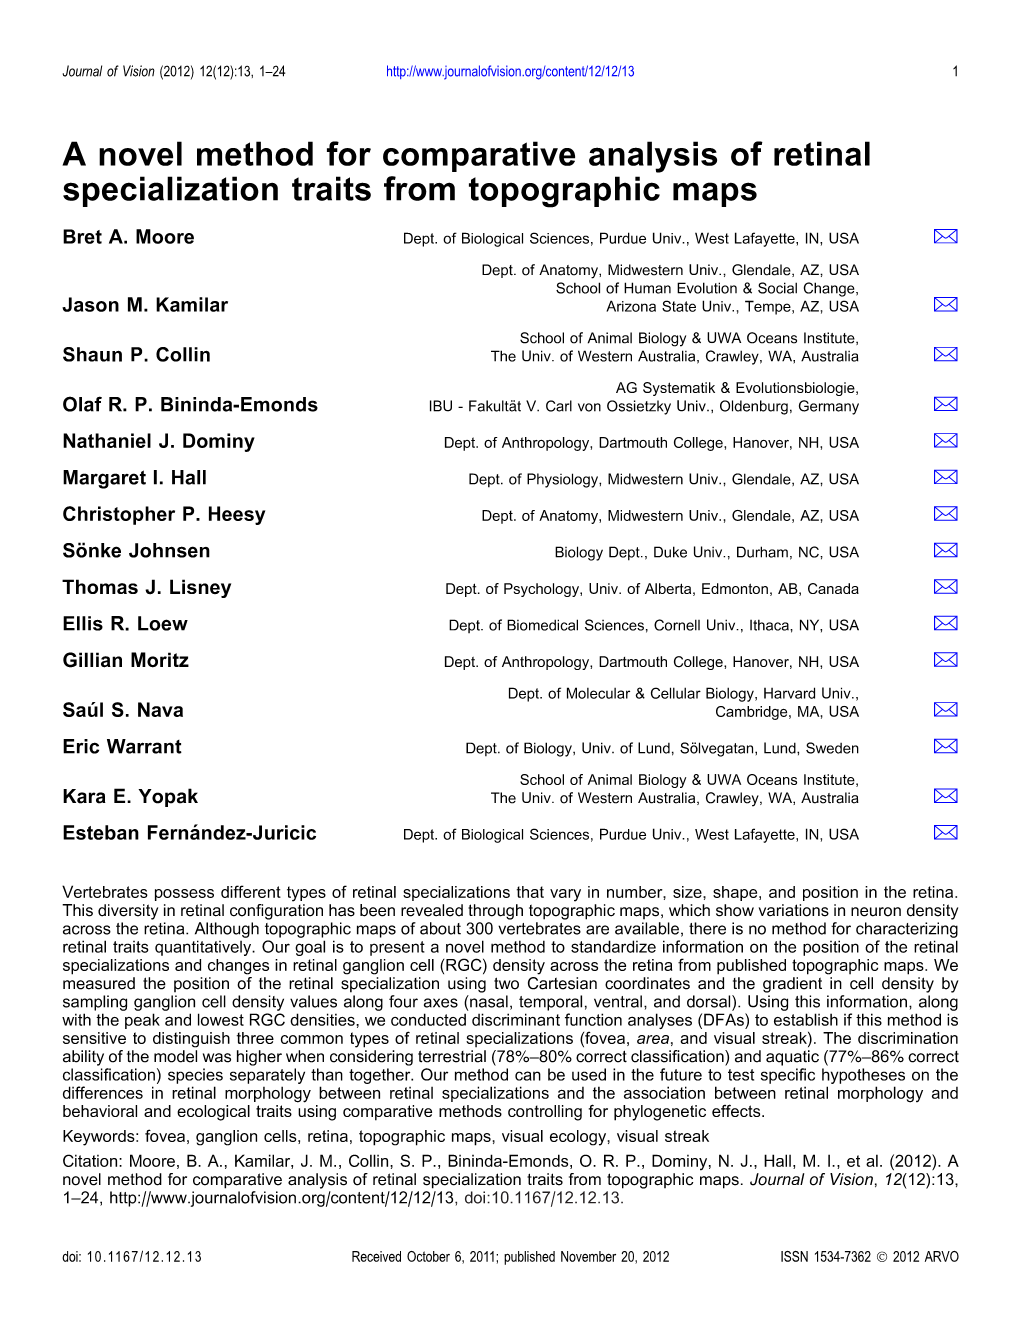 A Novel Method for Comparative Analysis of Retinal Specialization Traits from Topographic Maps